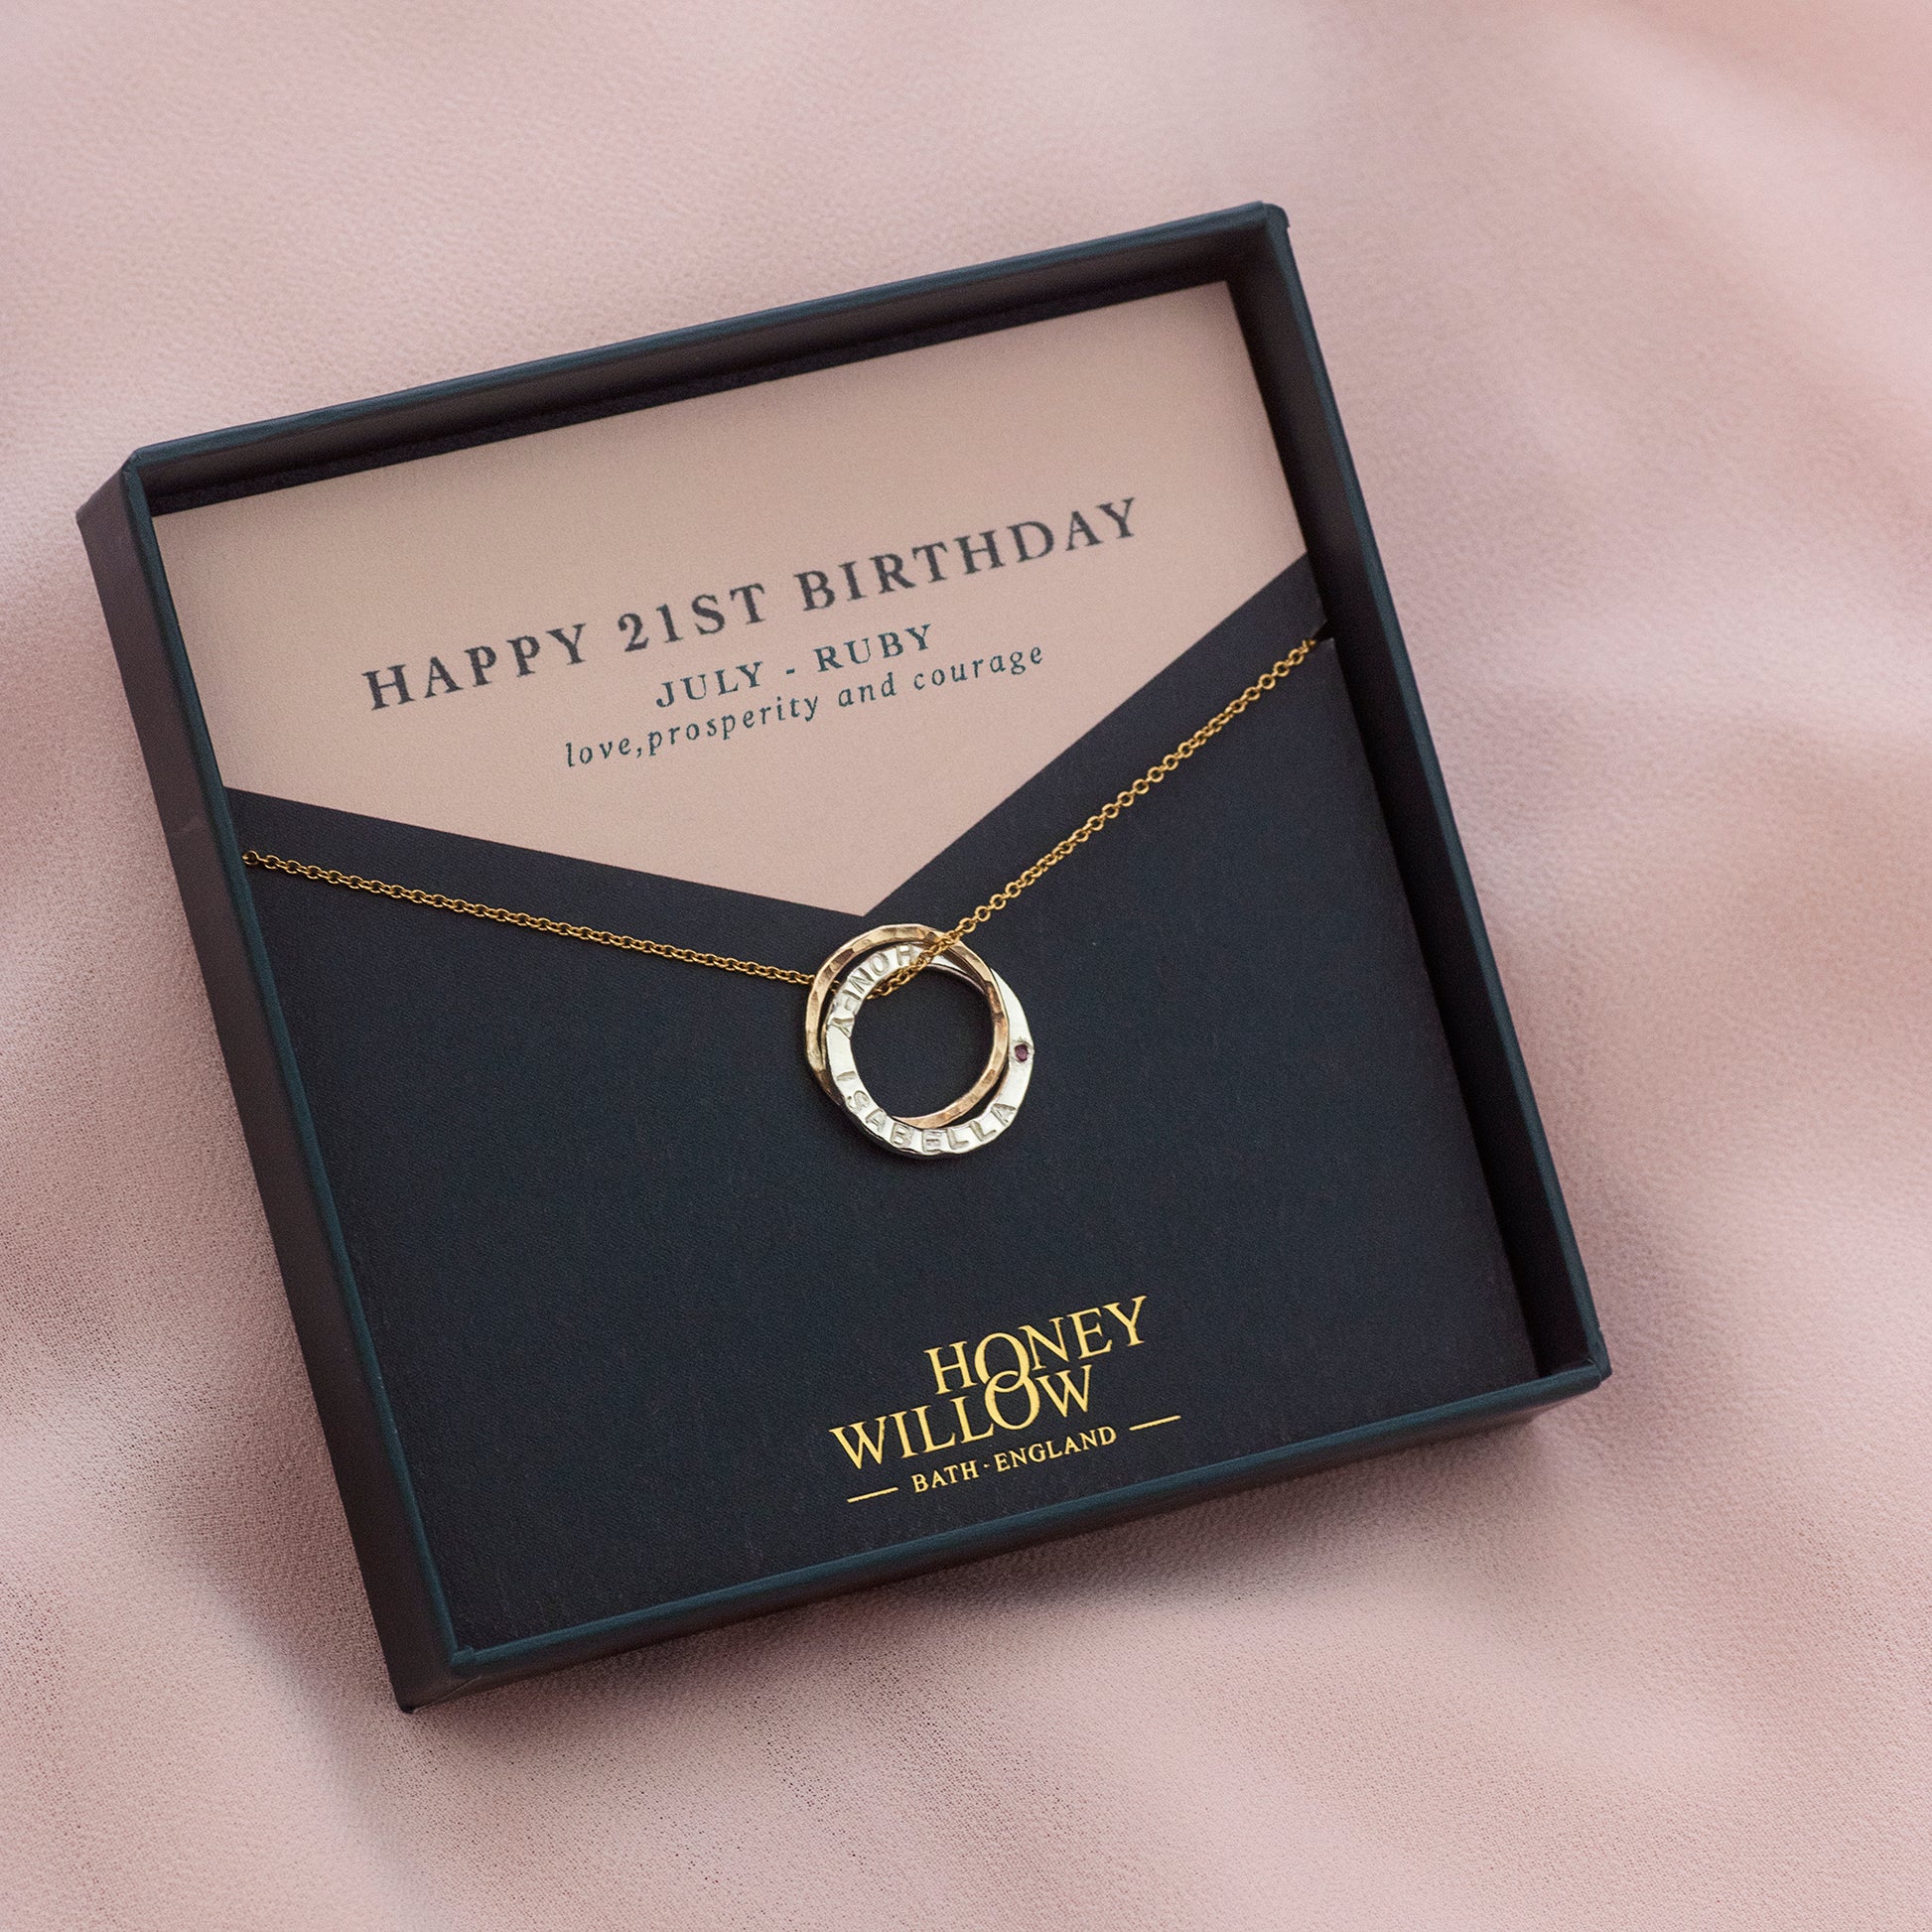 21st Birthday Gift - Personalised Birthstone Necklace - Petite Mixed Metal